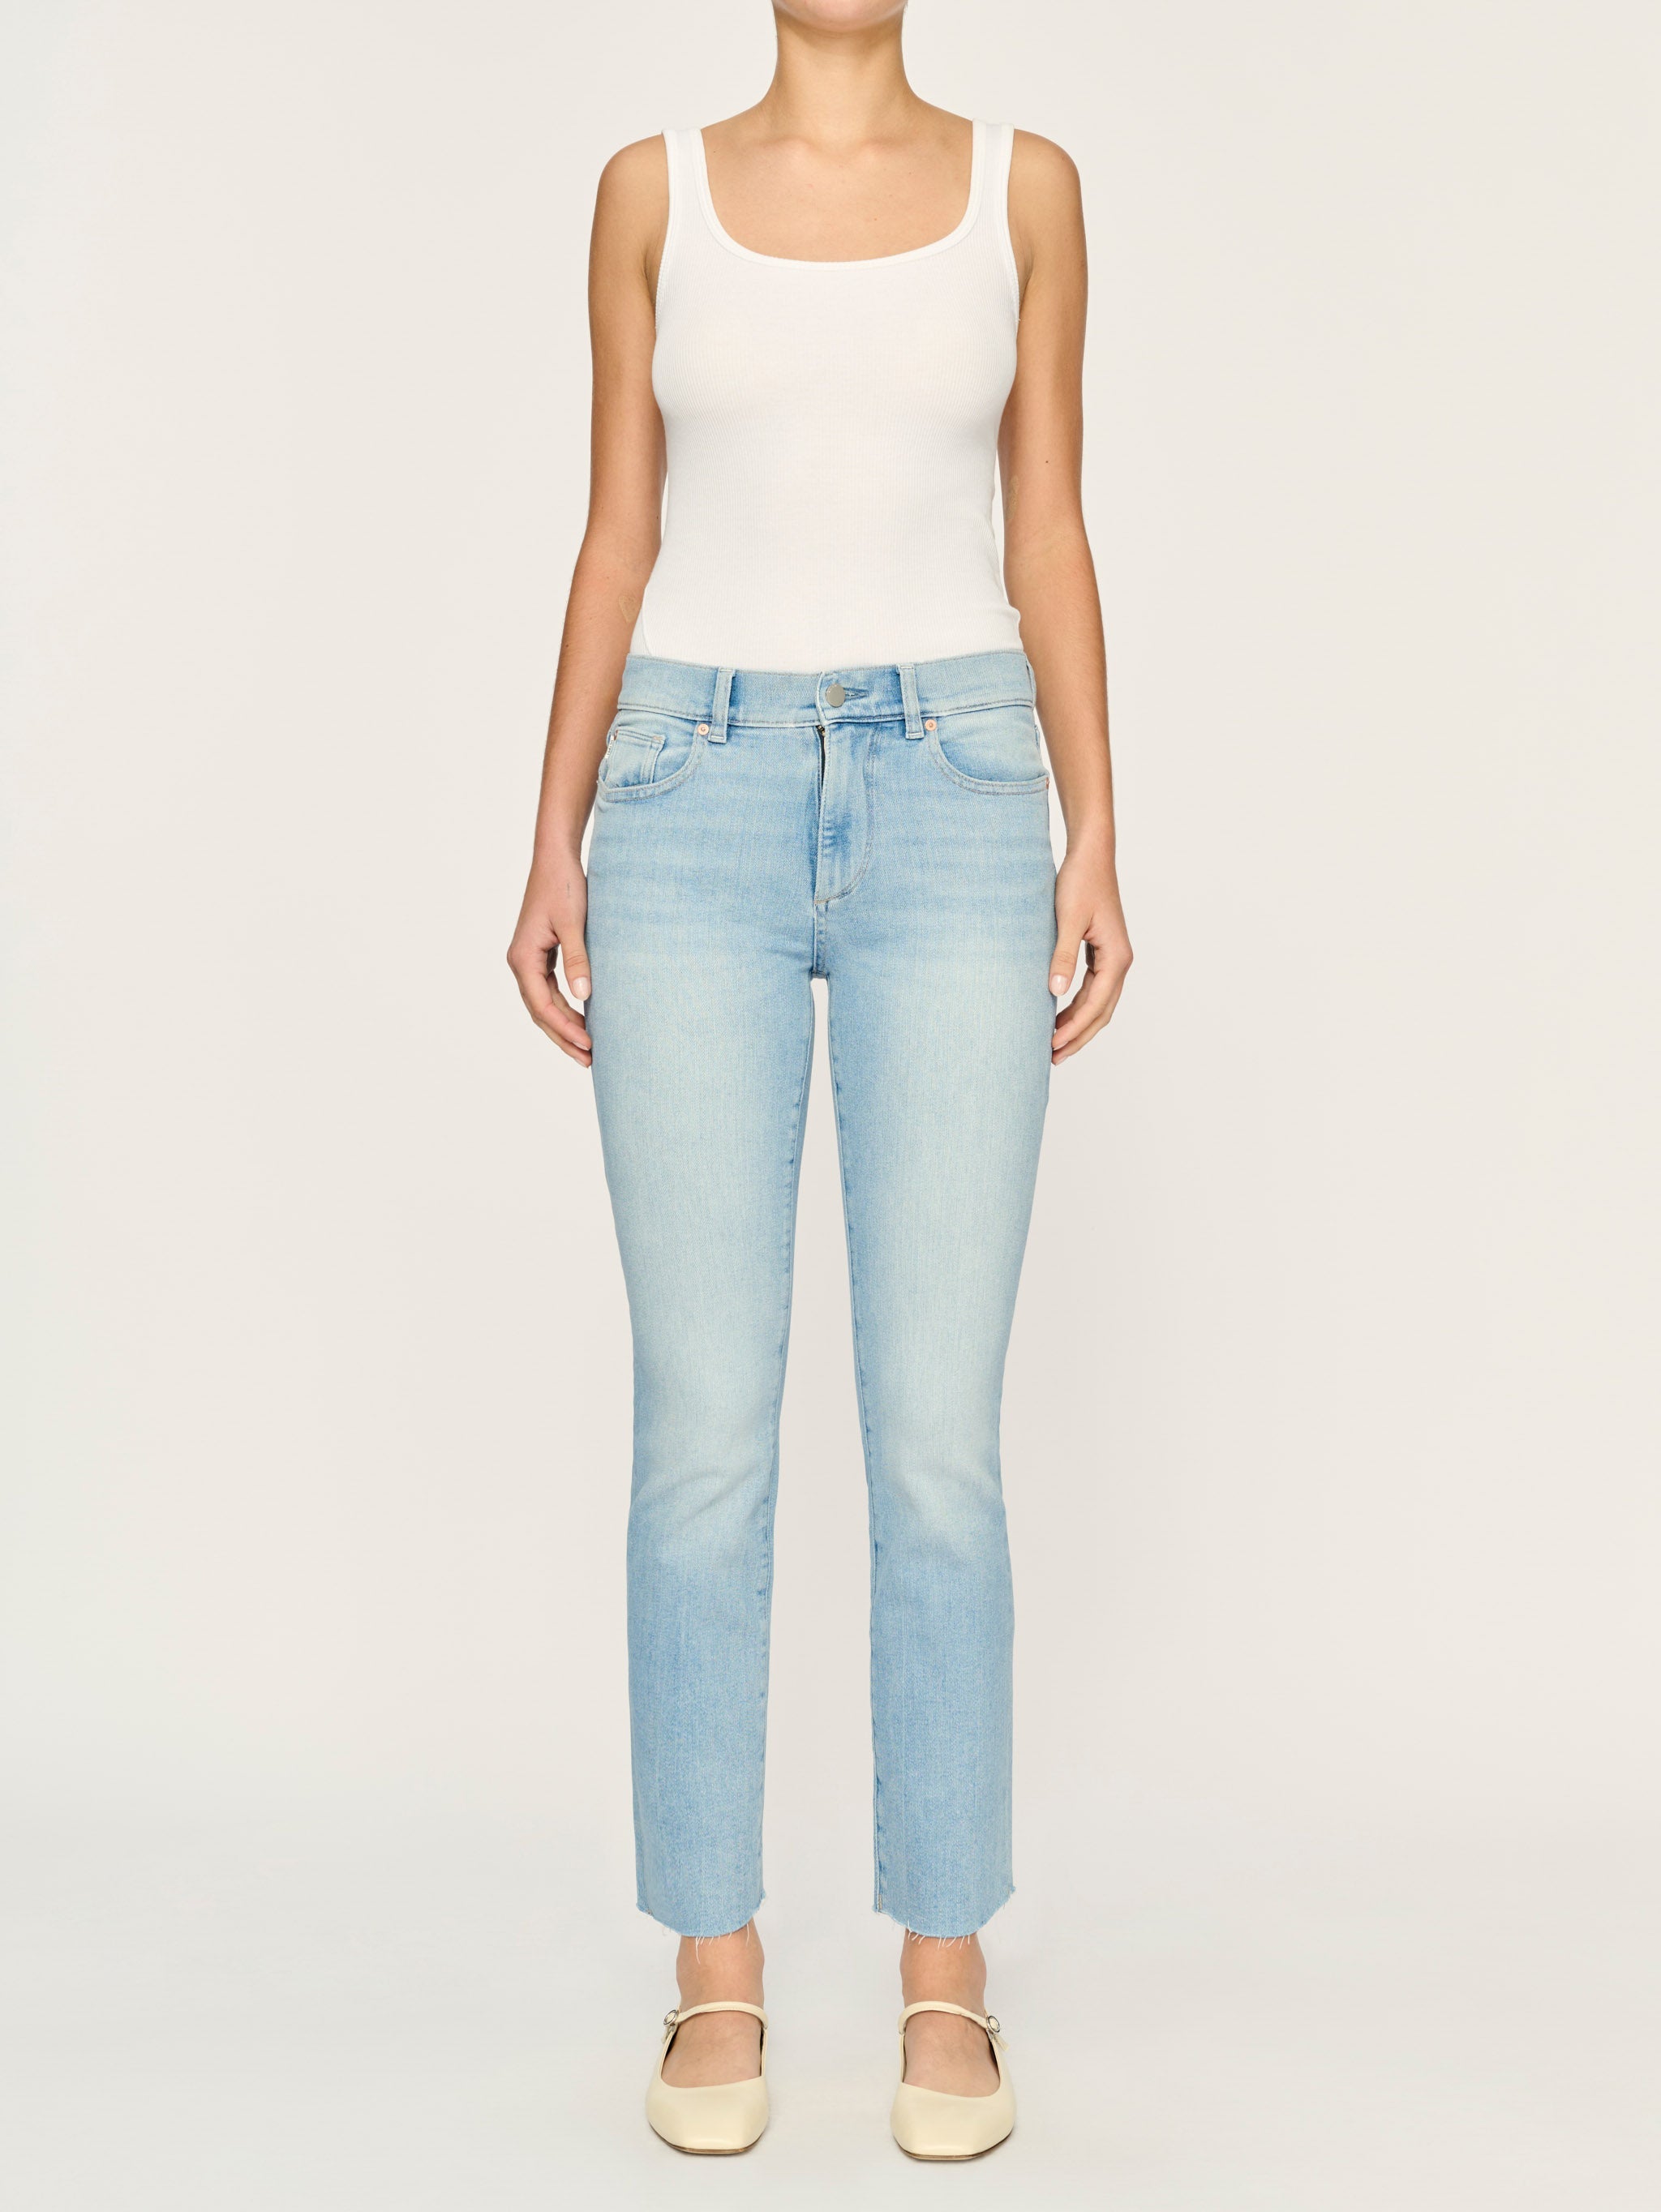 DL1961 Mara Straight Mid Rise Instasculpt Ankle Jean